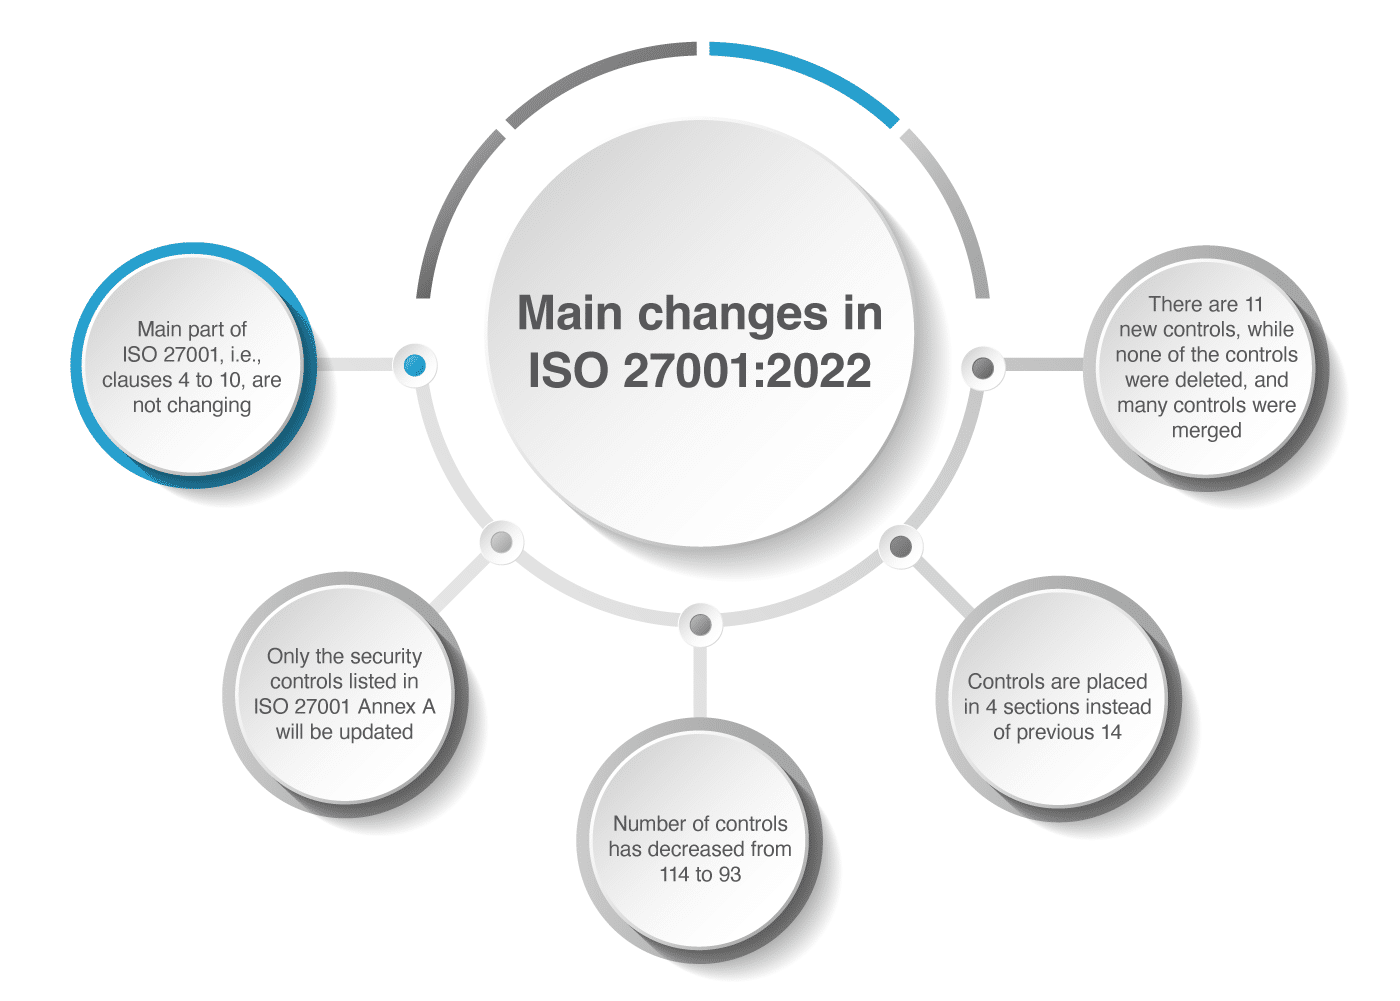 Changes in ISO 27001:2022 – What is changing? When will it happen?